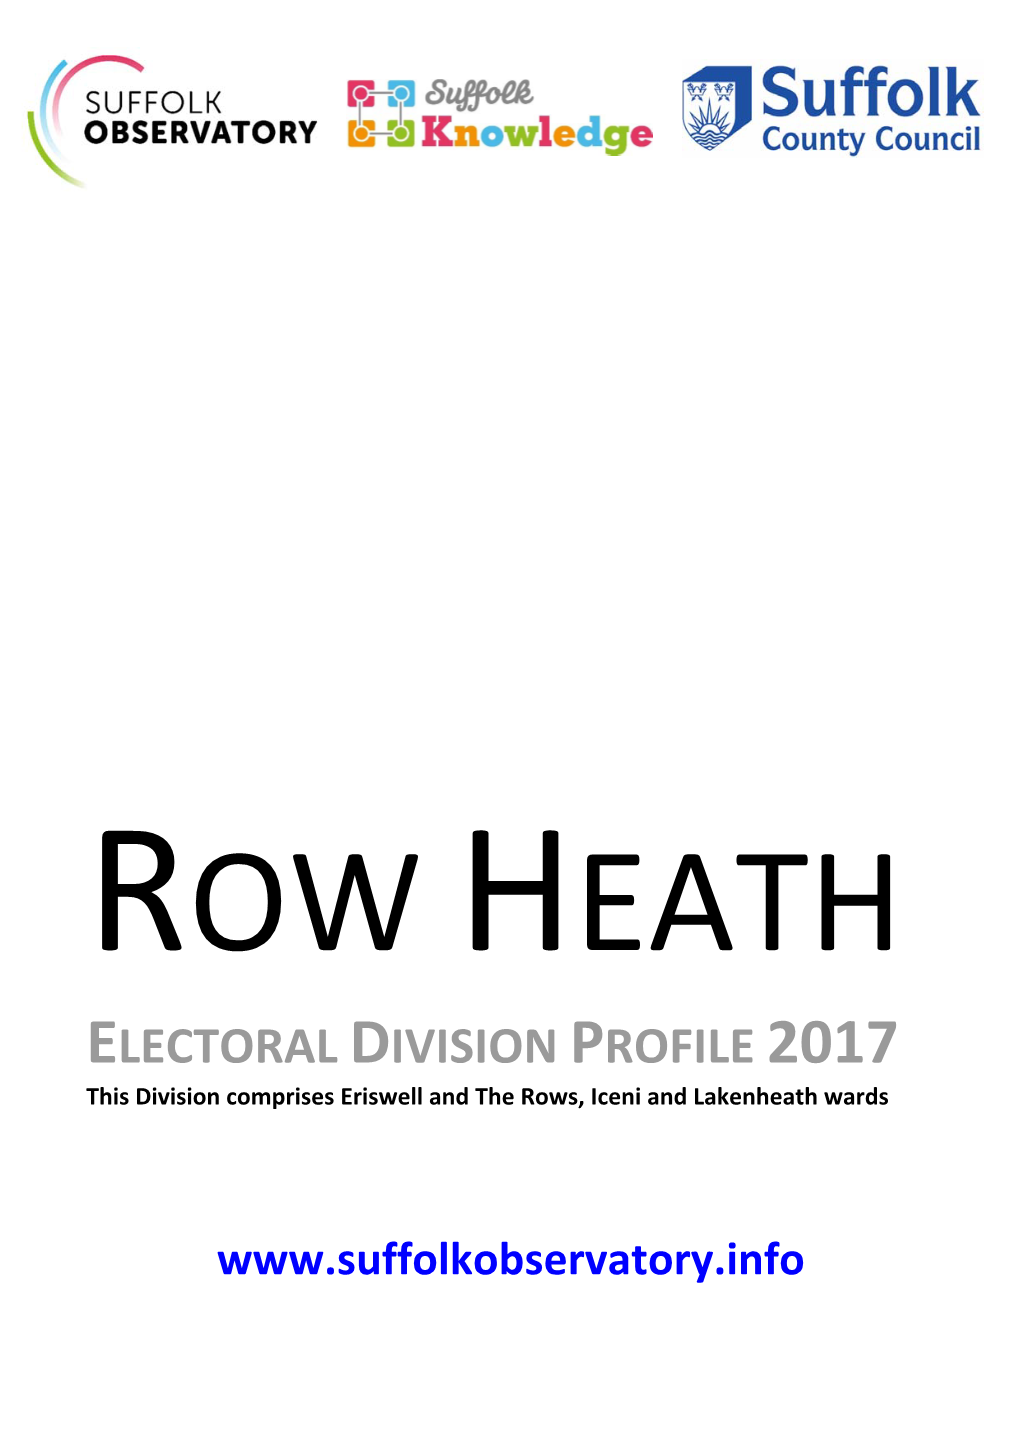 ELECTORAL DIVISION PROFILE 2017 This Division Comprises Eriswell and the Rows, Iceni and Lakenheath Wards